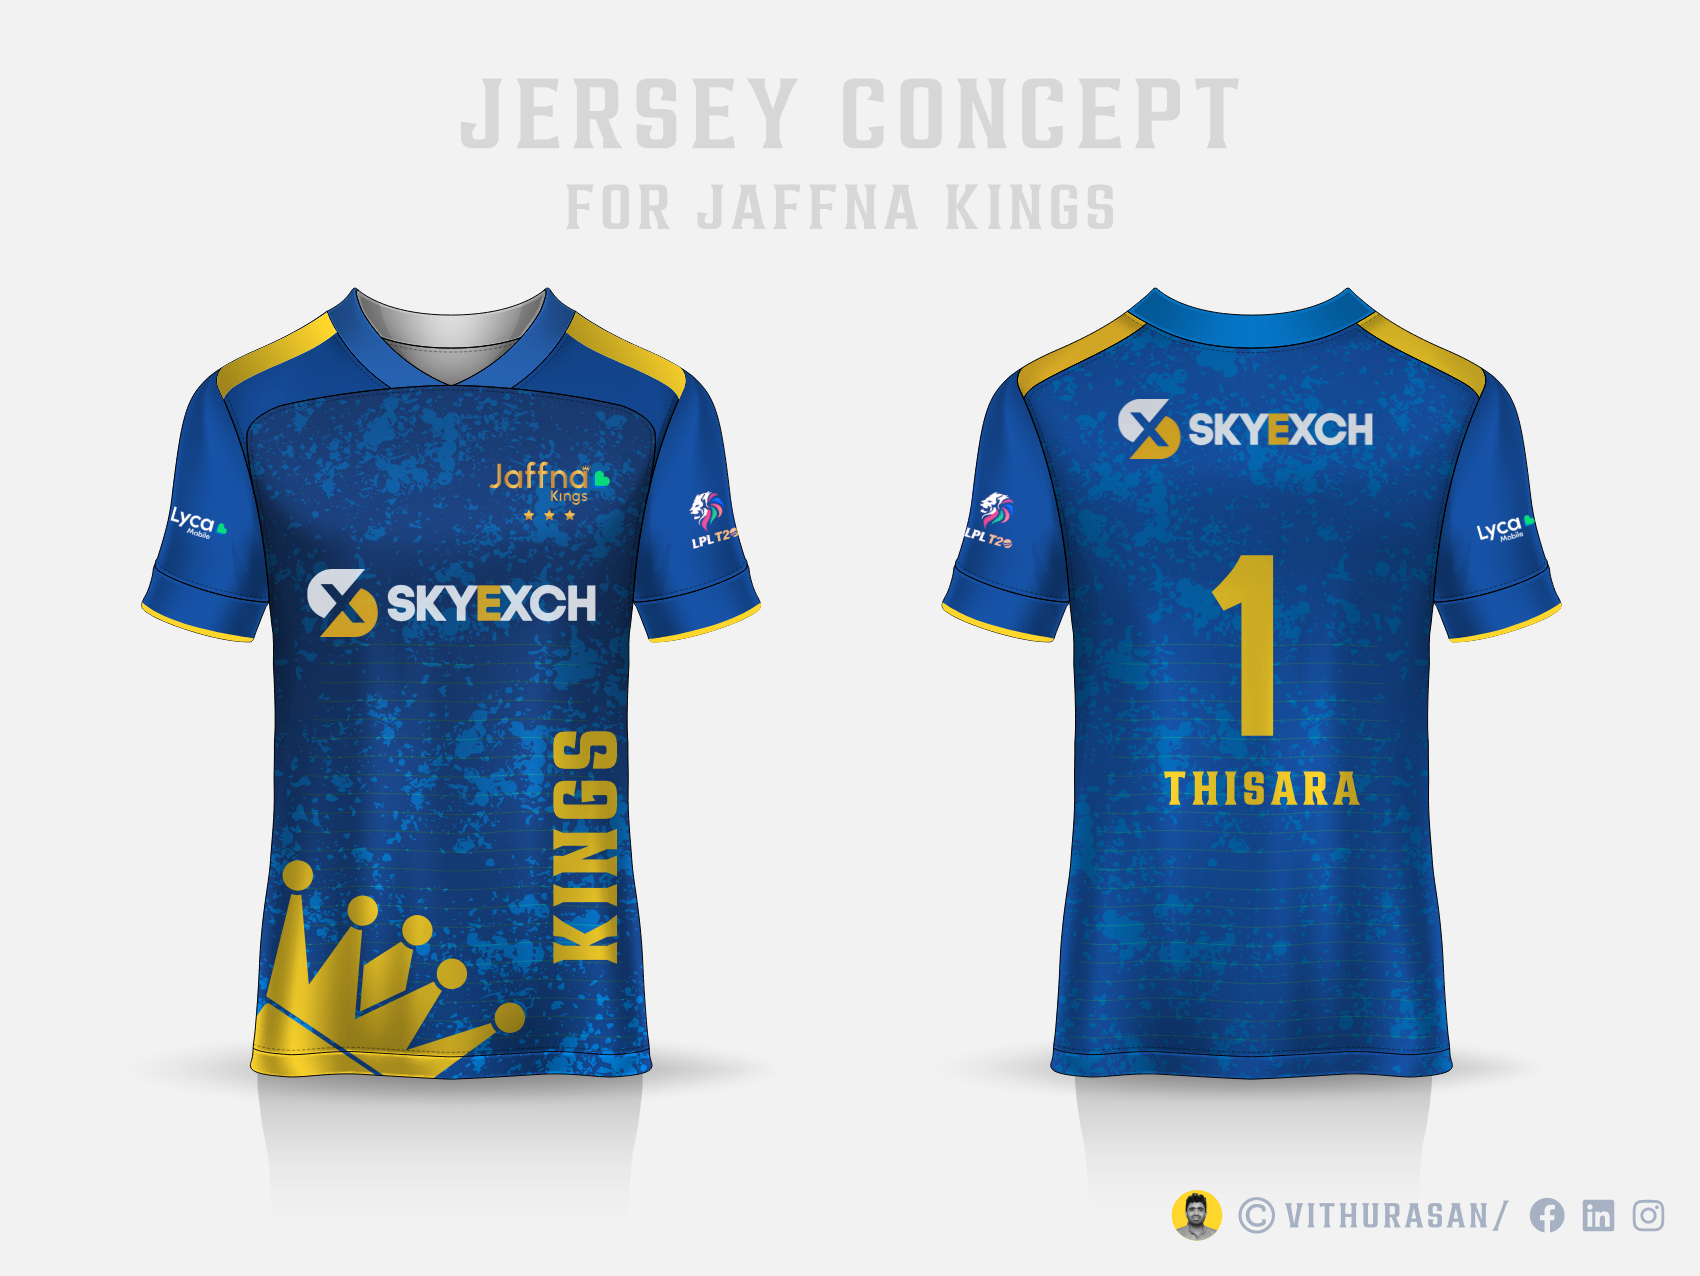 Jersey concept for Jaffna kings by Vithurasan on Dribbble